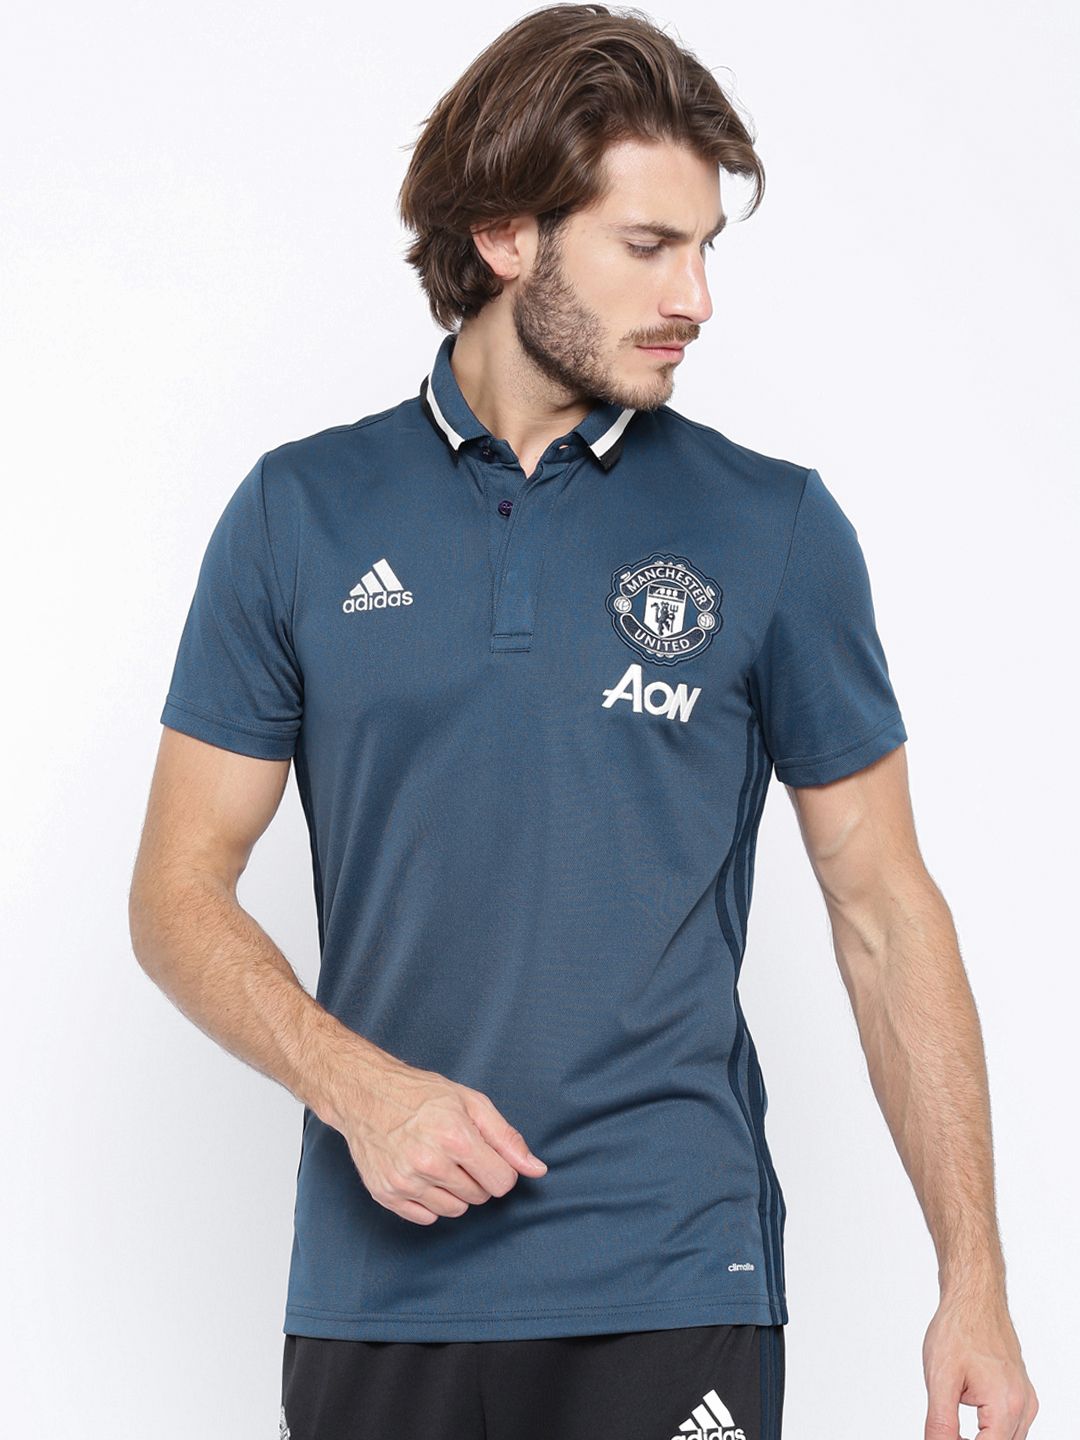 manchester united jersey india adidas